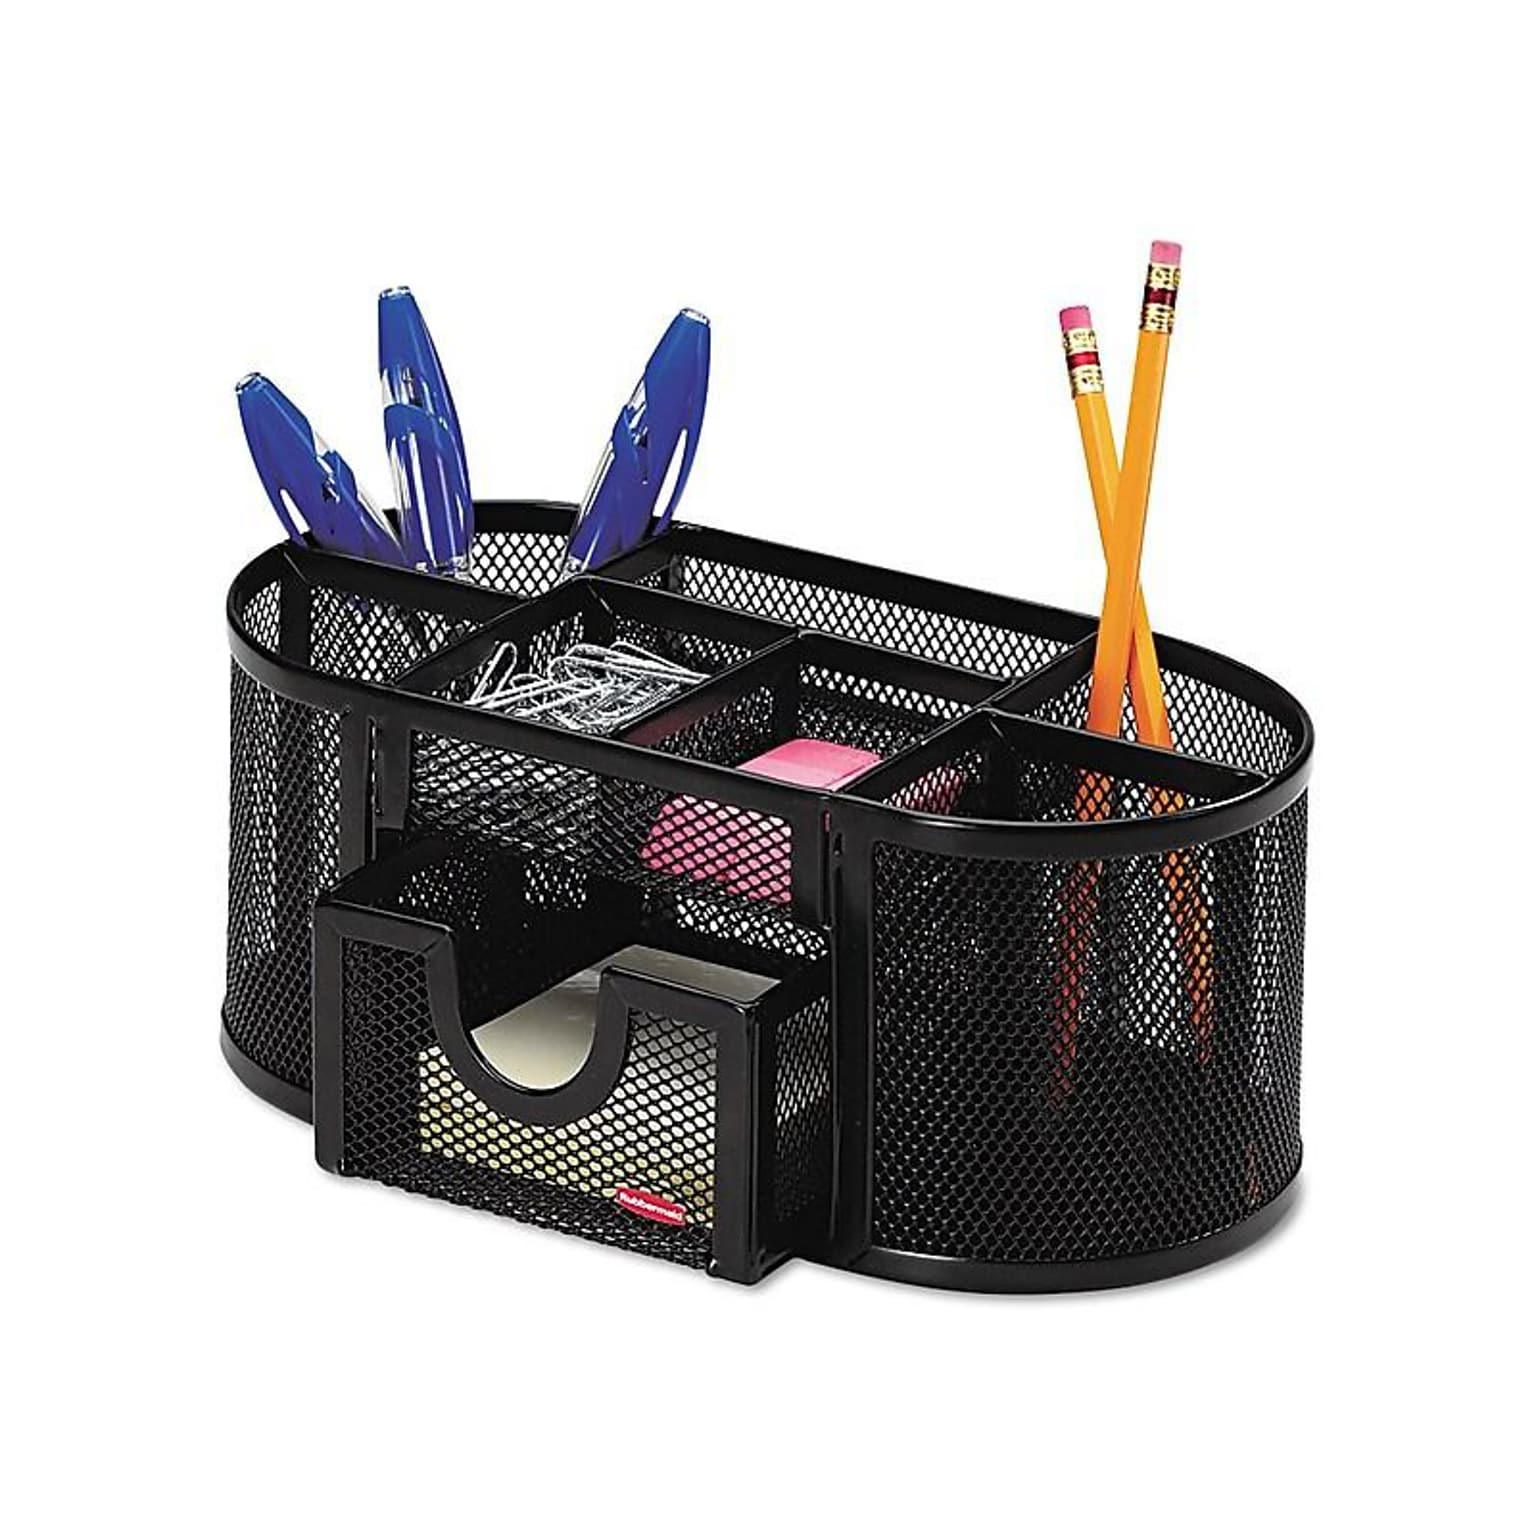 Rolodex Pencil and Accessory Holder, Black Steel (1746466)